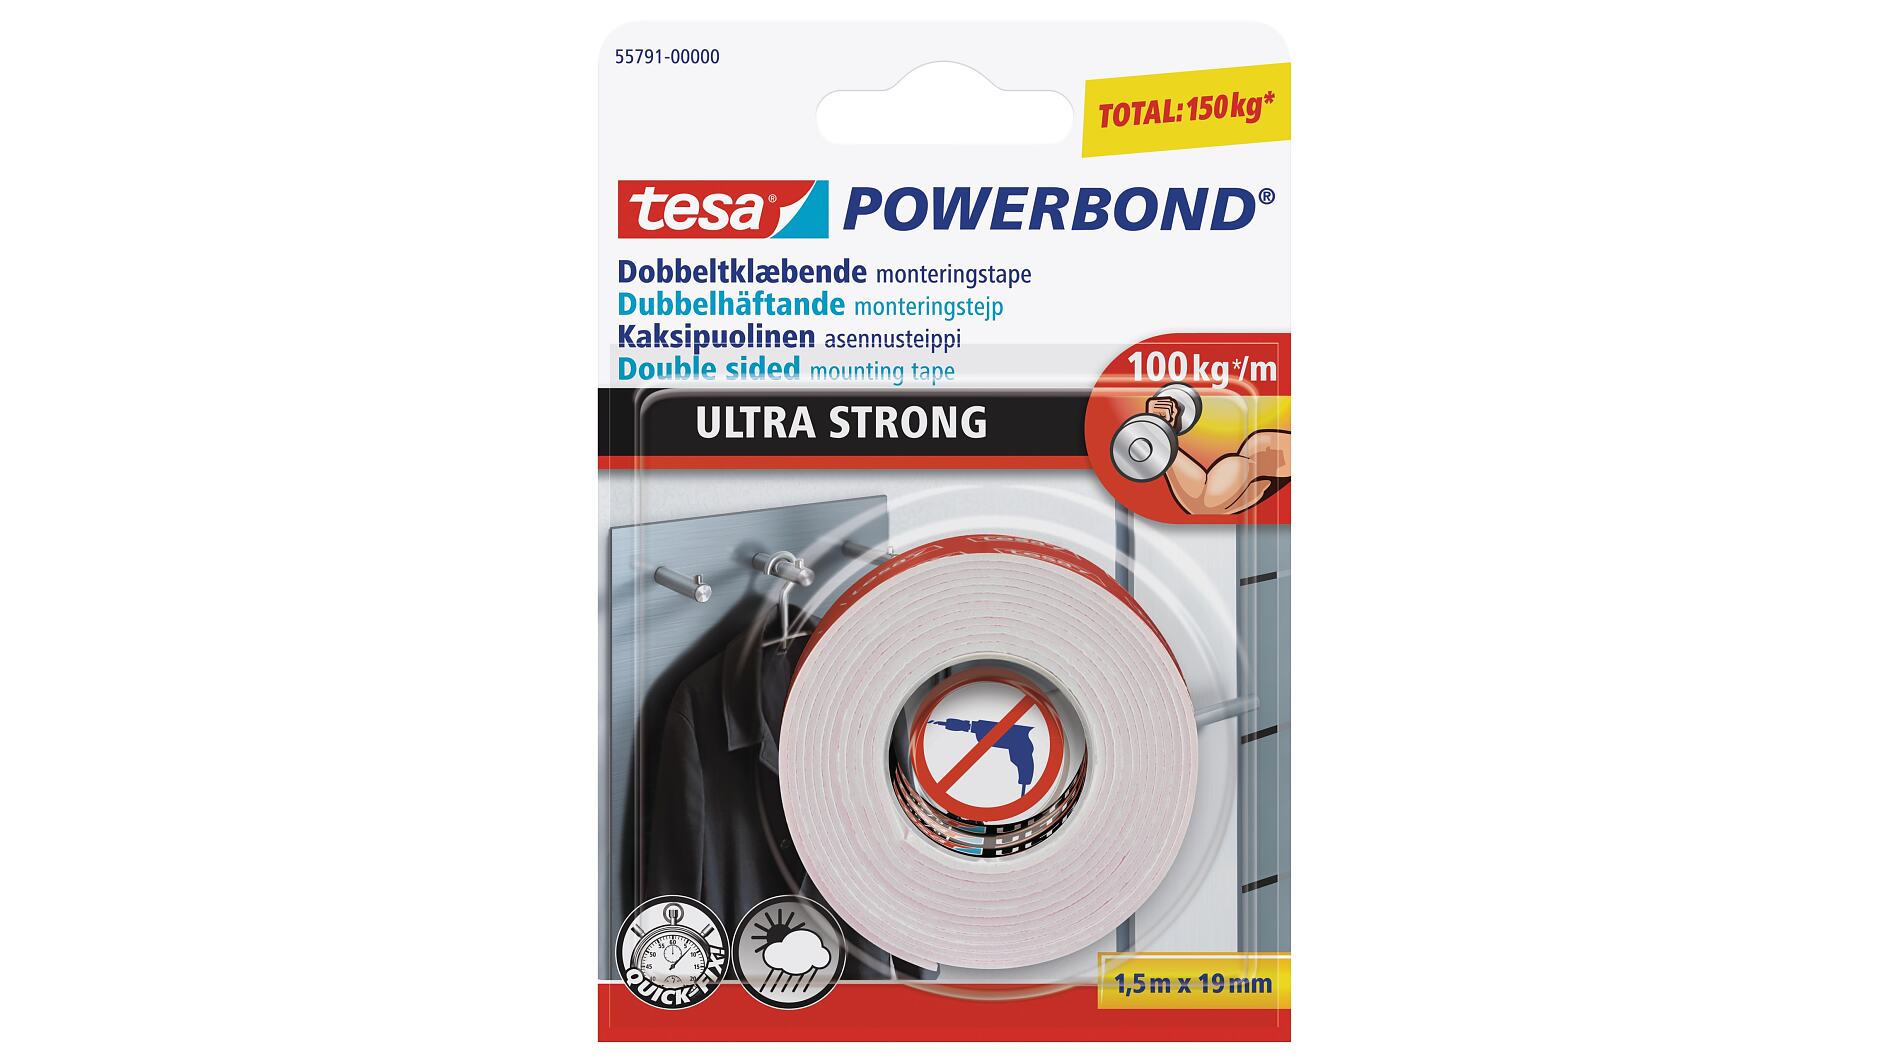 HPX Strong Double-Sided Tape 19mm - 2 meter